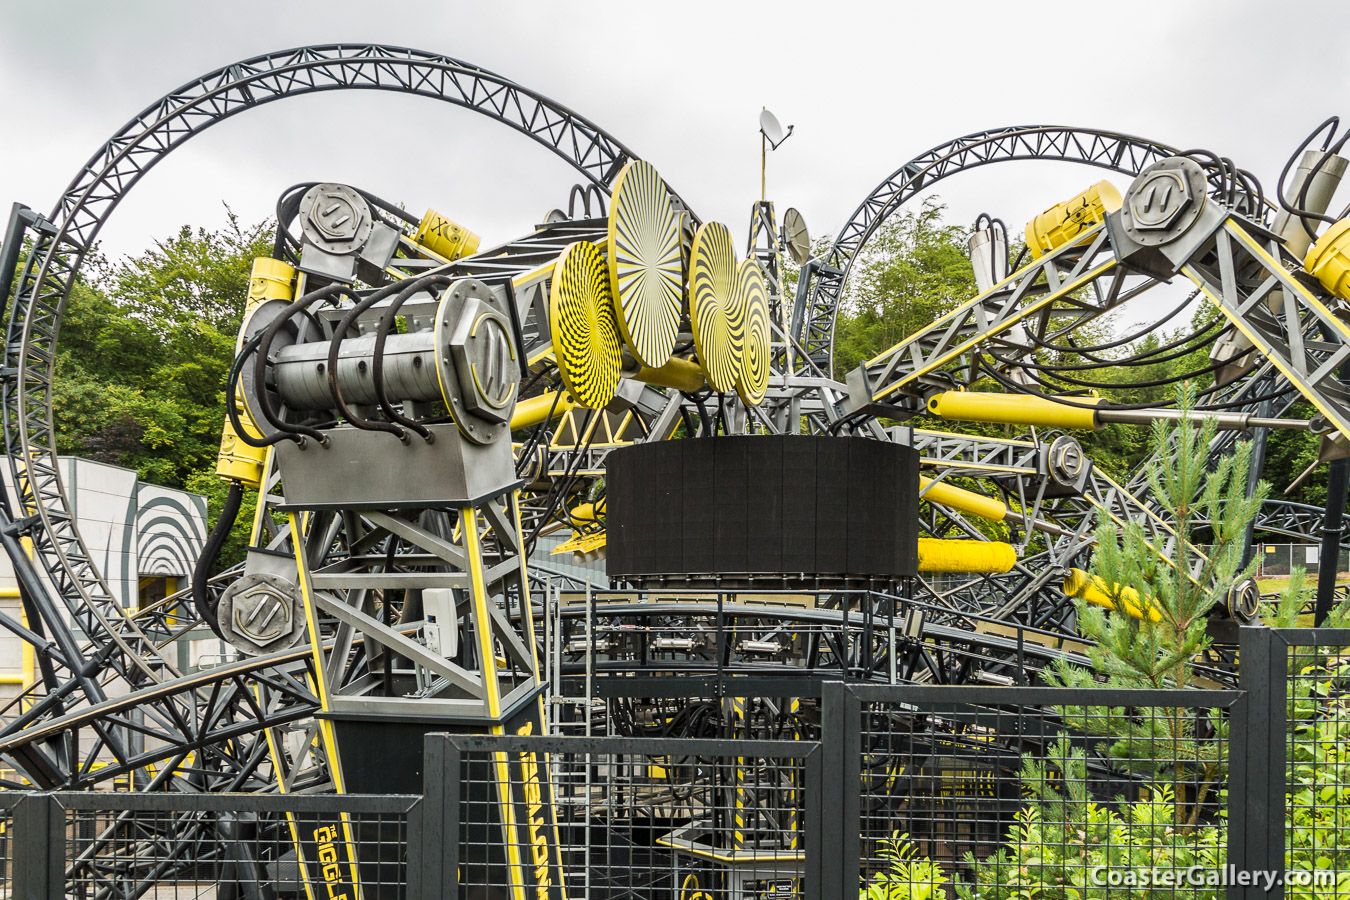 Merlin Entertainment Fined for the Smiler accident